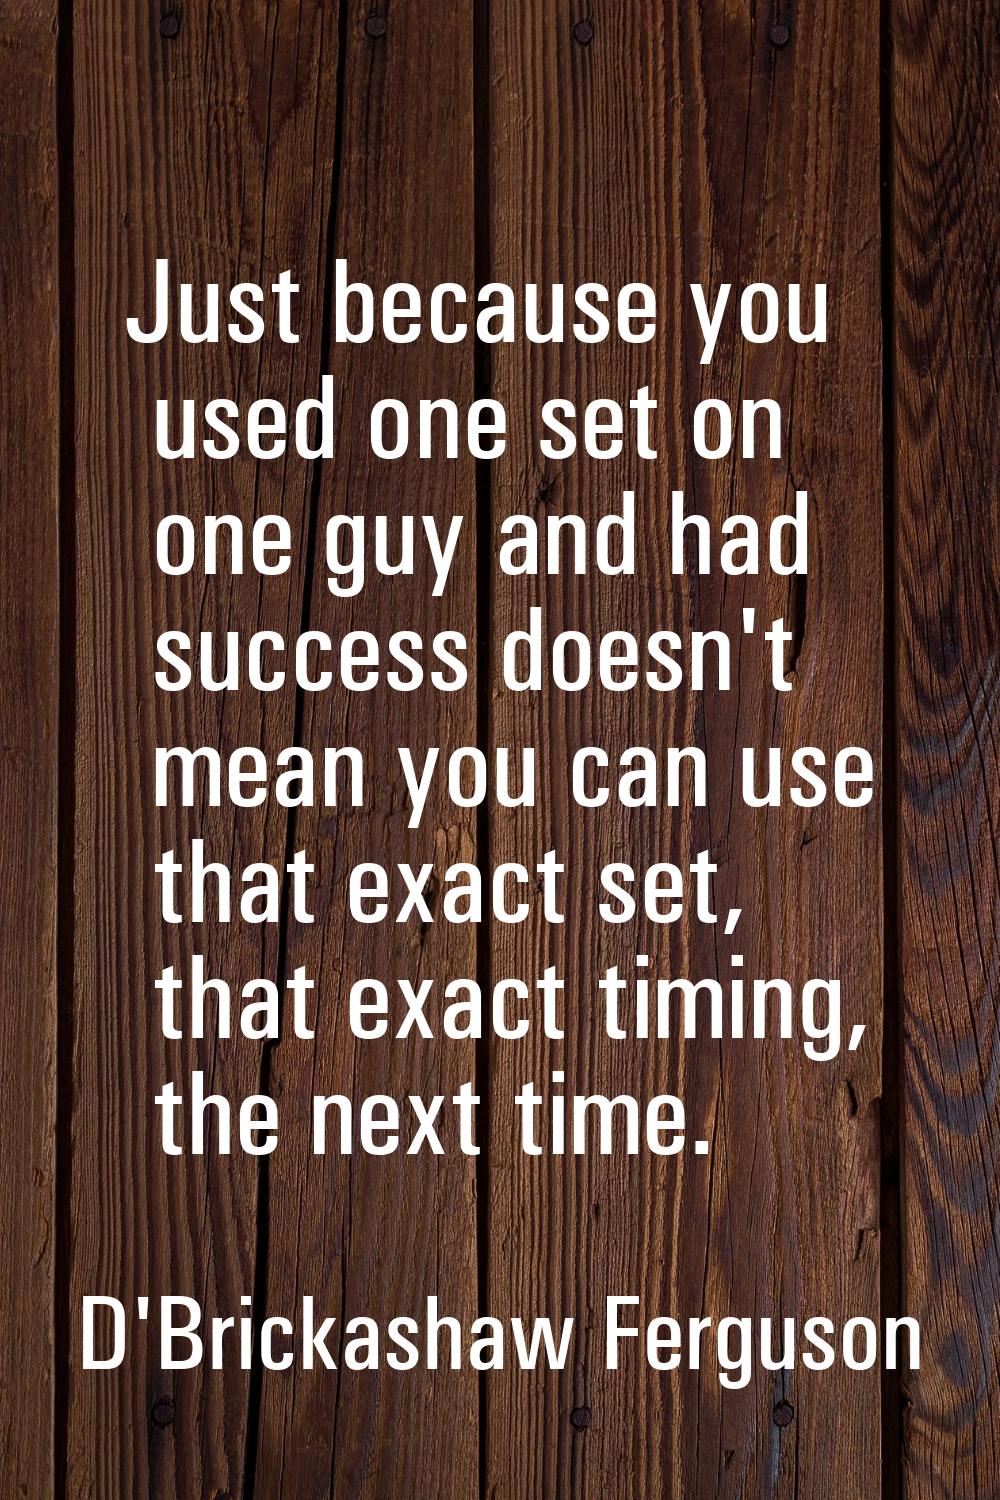 Just because you used one set on one guy and had success doesn't mean you can use that exact set, t